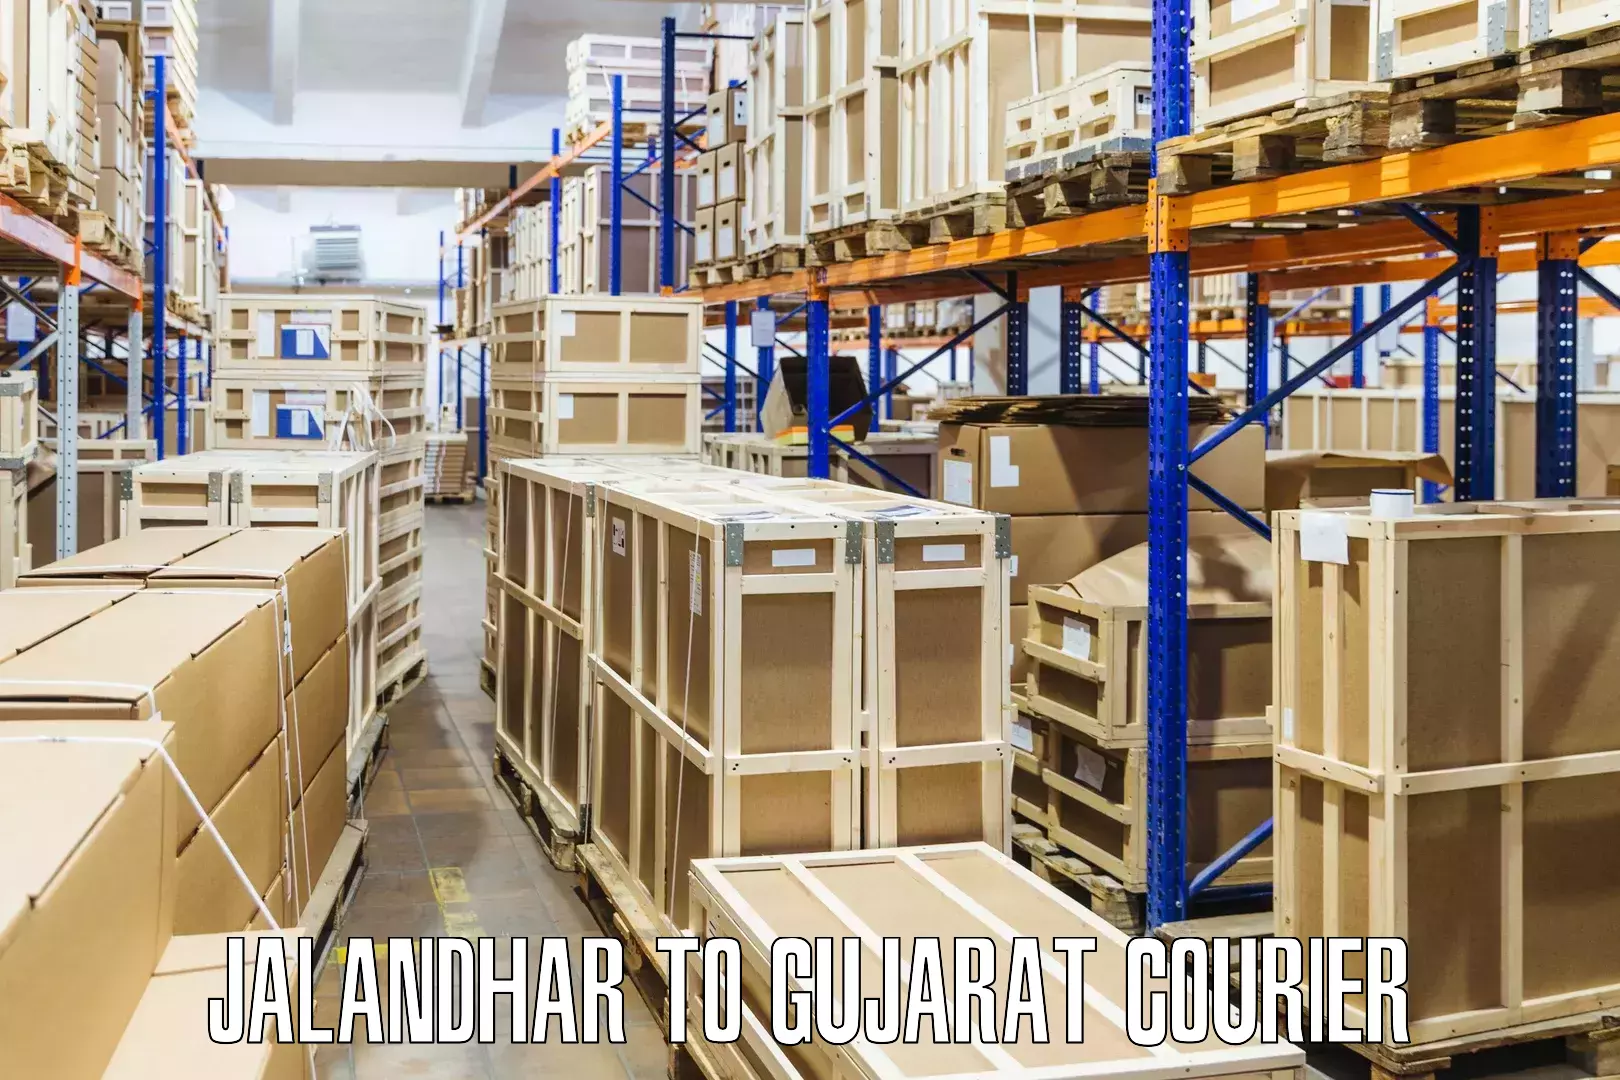 Round-the-clock parcel delivery Jalandhar to Ahmedabad